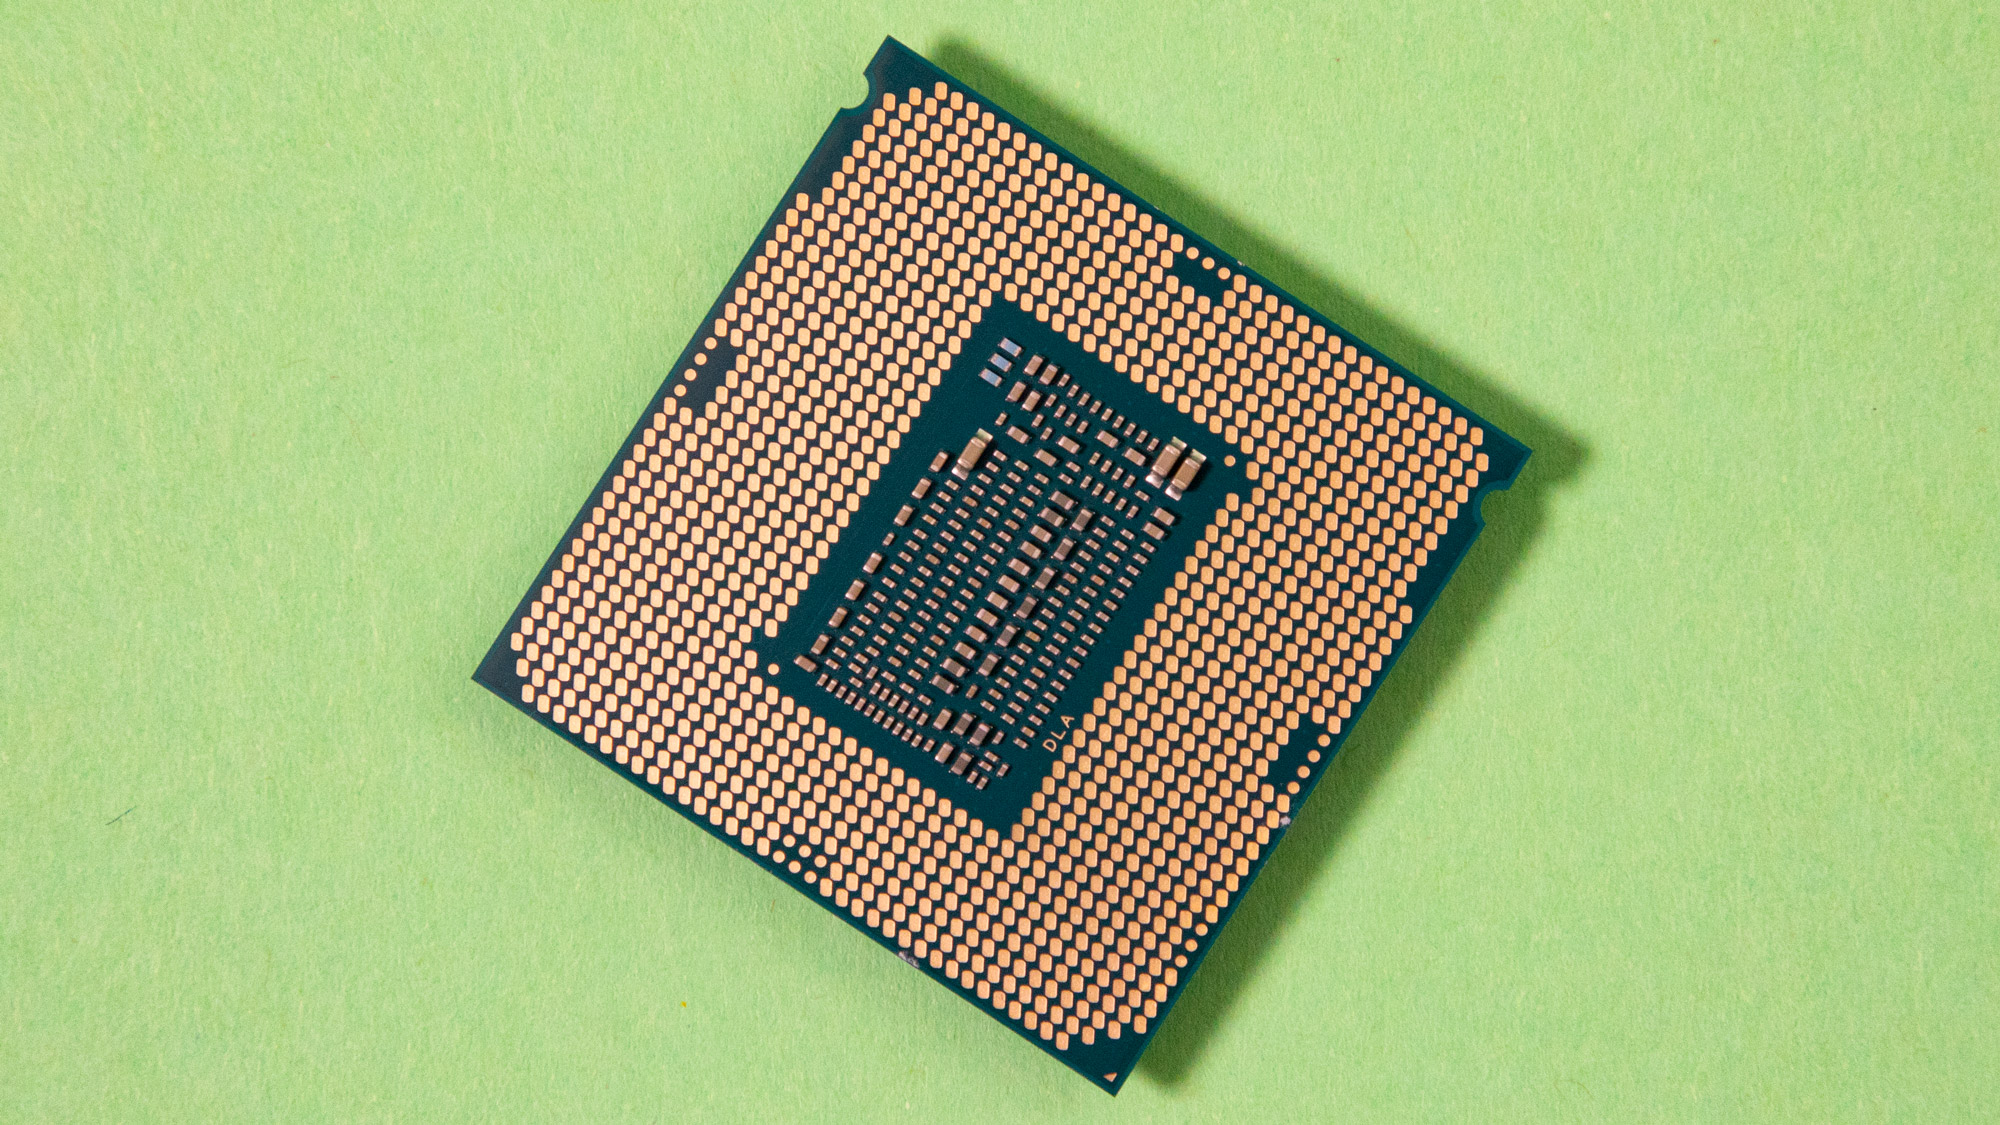 Leaked Benchmark Shows Intel Core i5-10400 Matching i7-9700F in